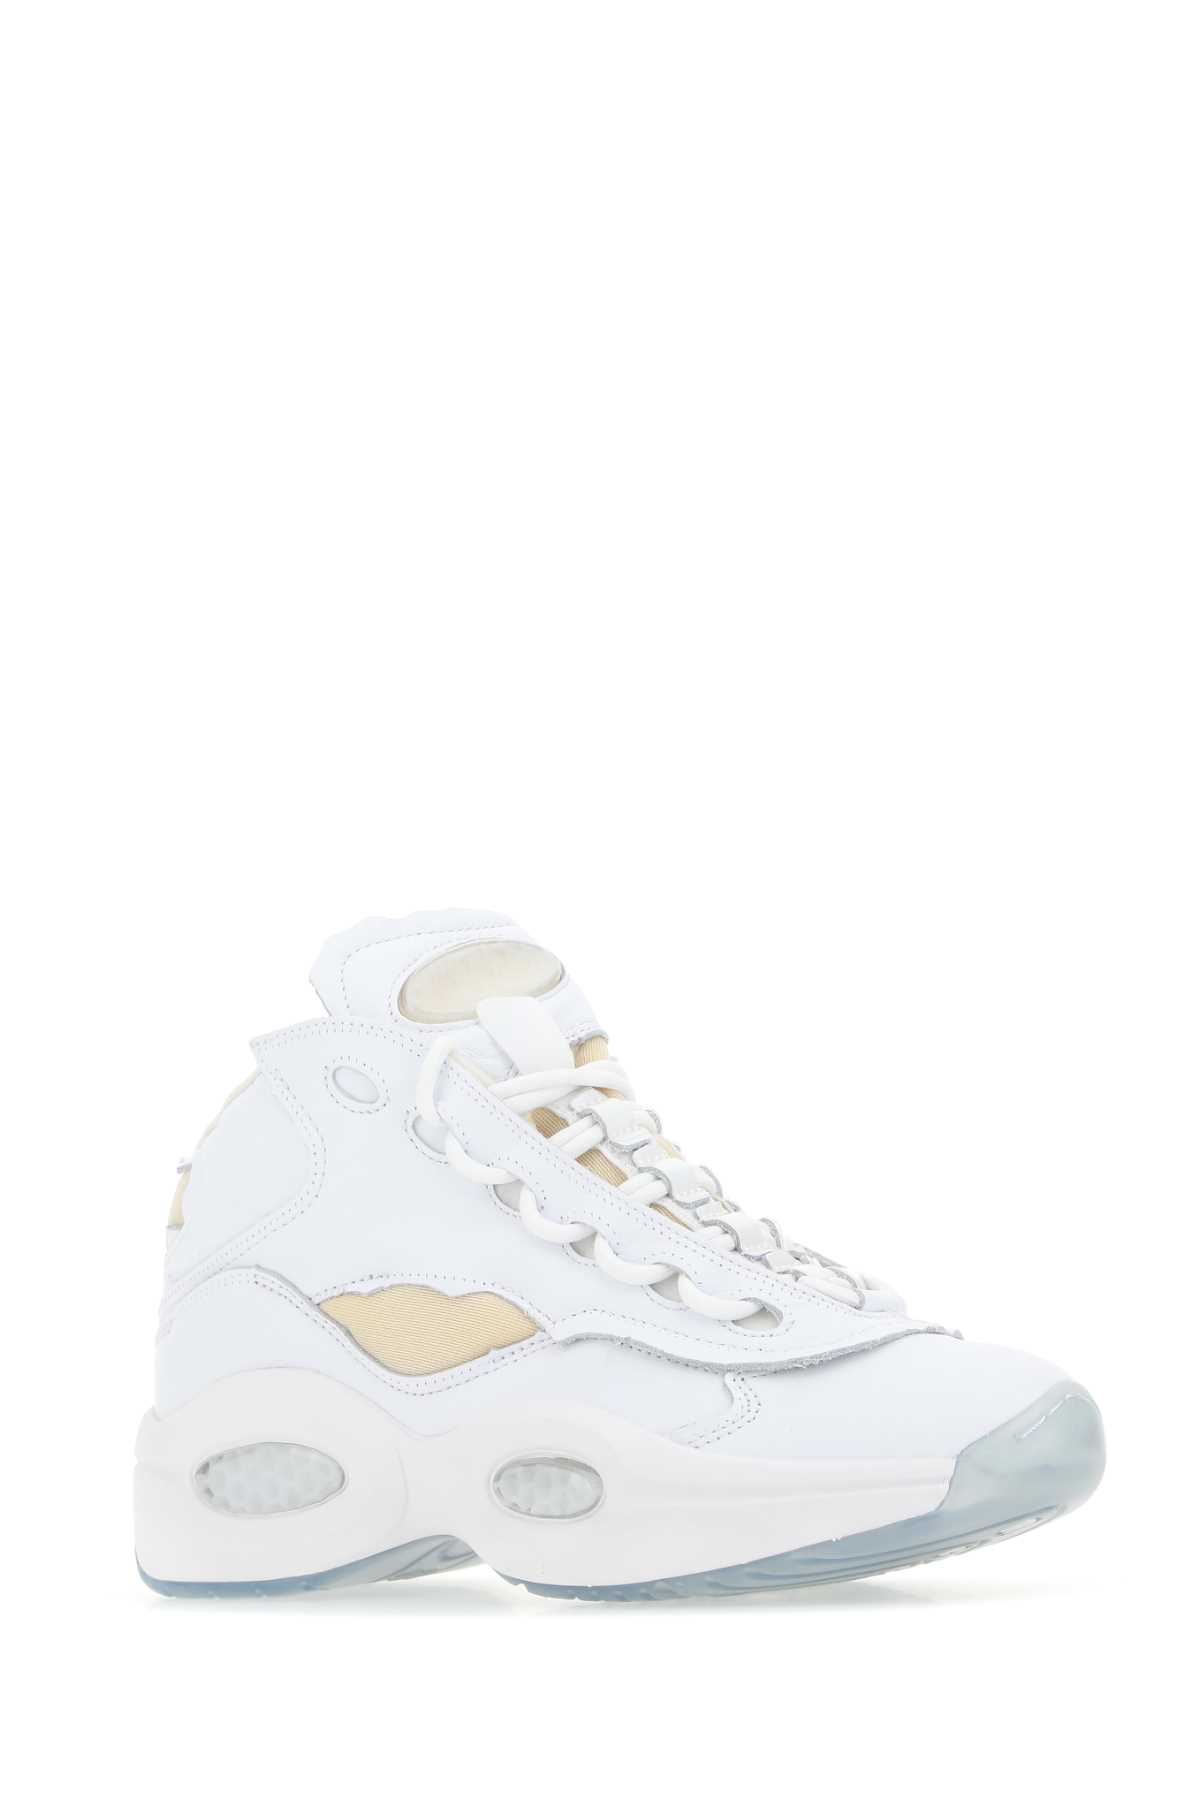 Shop Maison Margiela White Leather Project 0 Tq Memory Of Sneakers In Ftwwhtblackftwwht